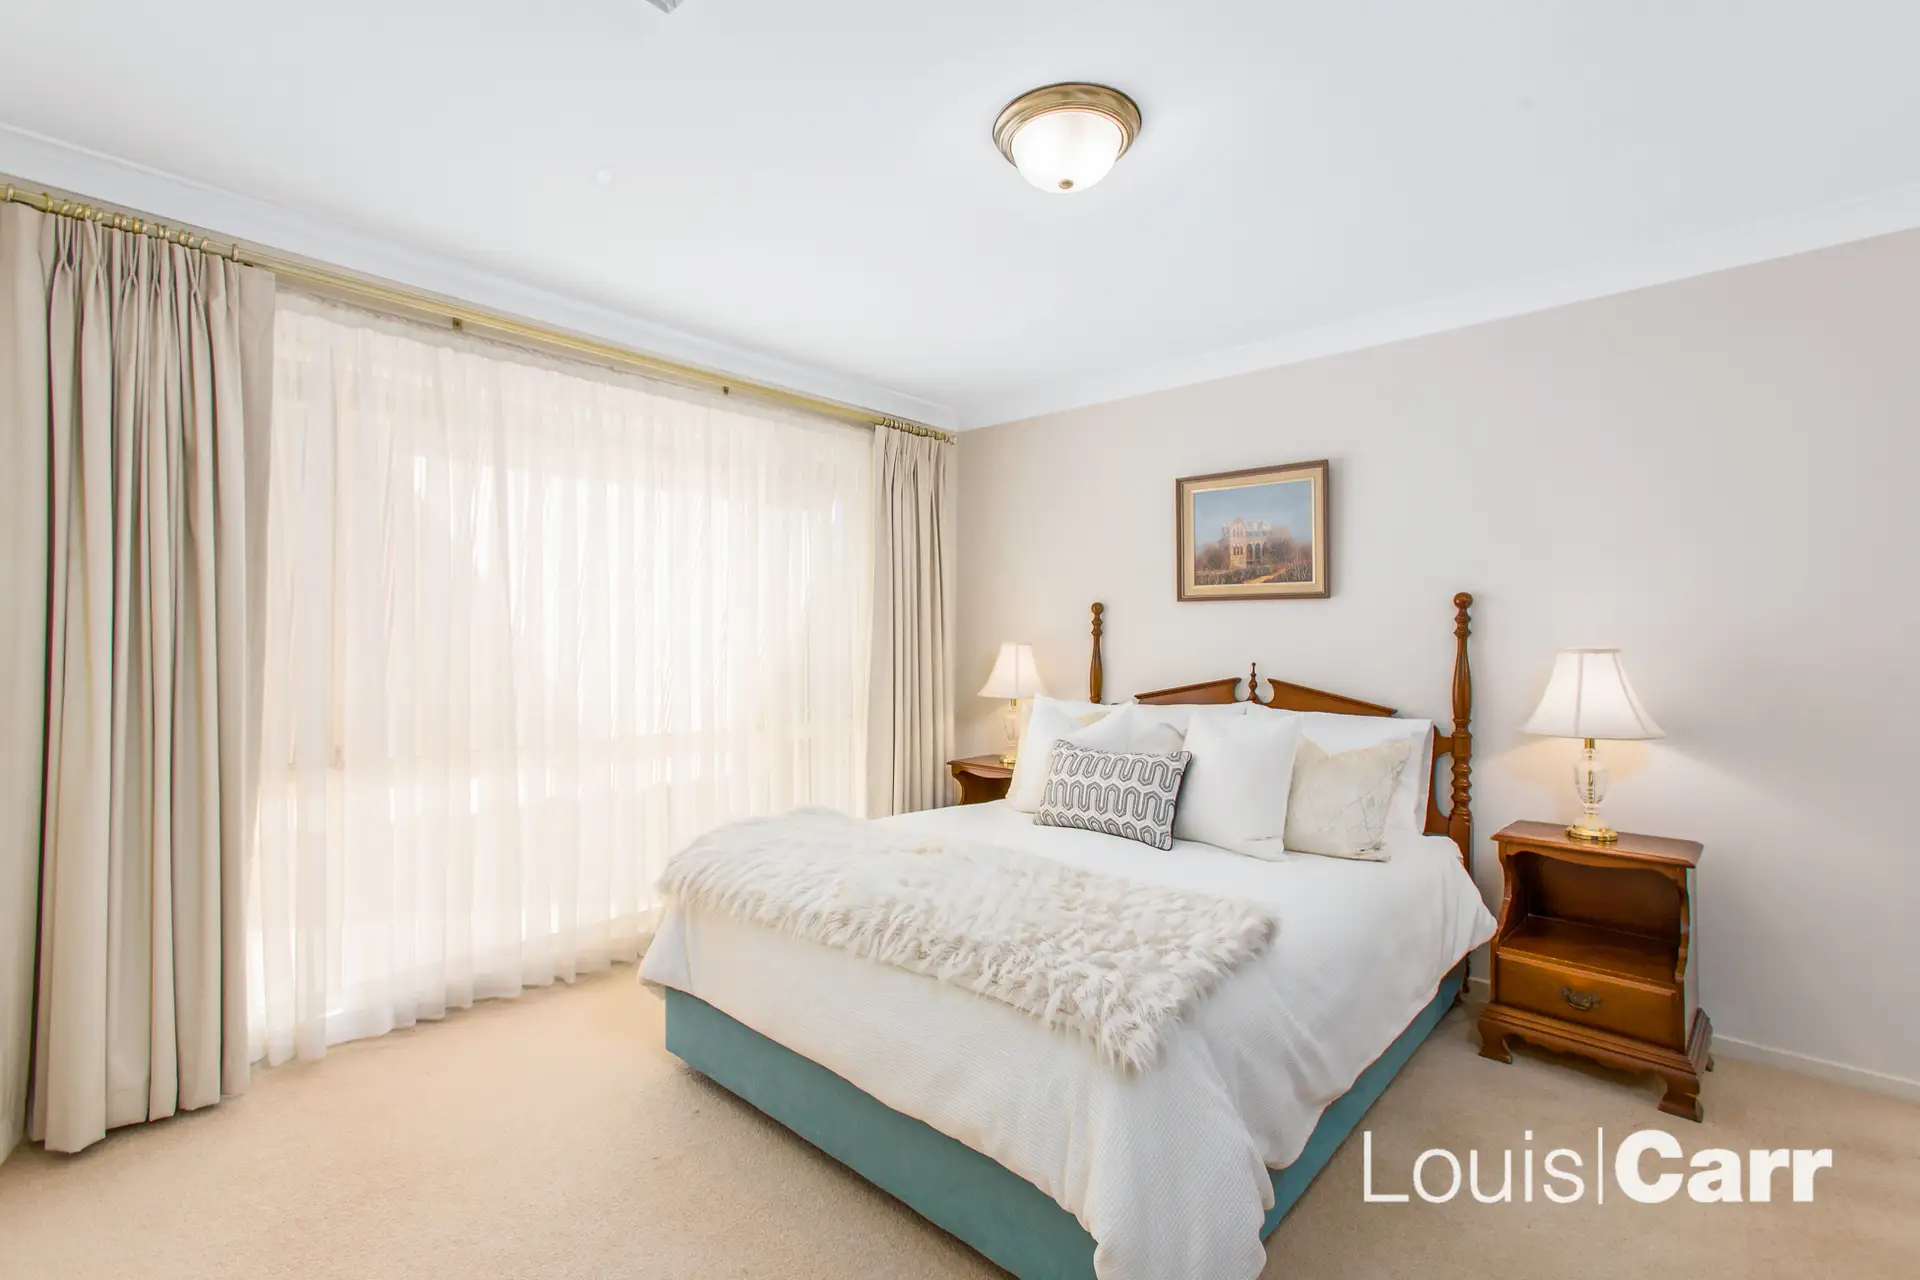 Photo #9: 6 Selina Place, Cherrybrook - Sold by Louis Carr Real Estate